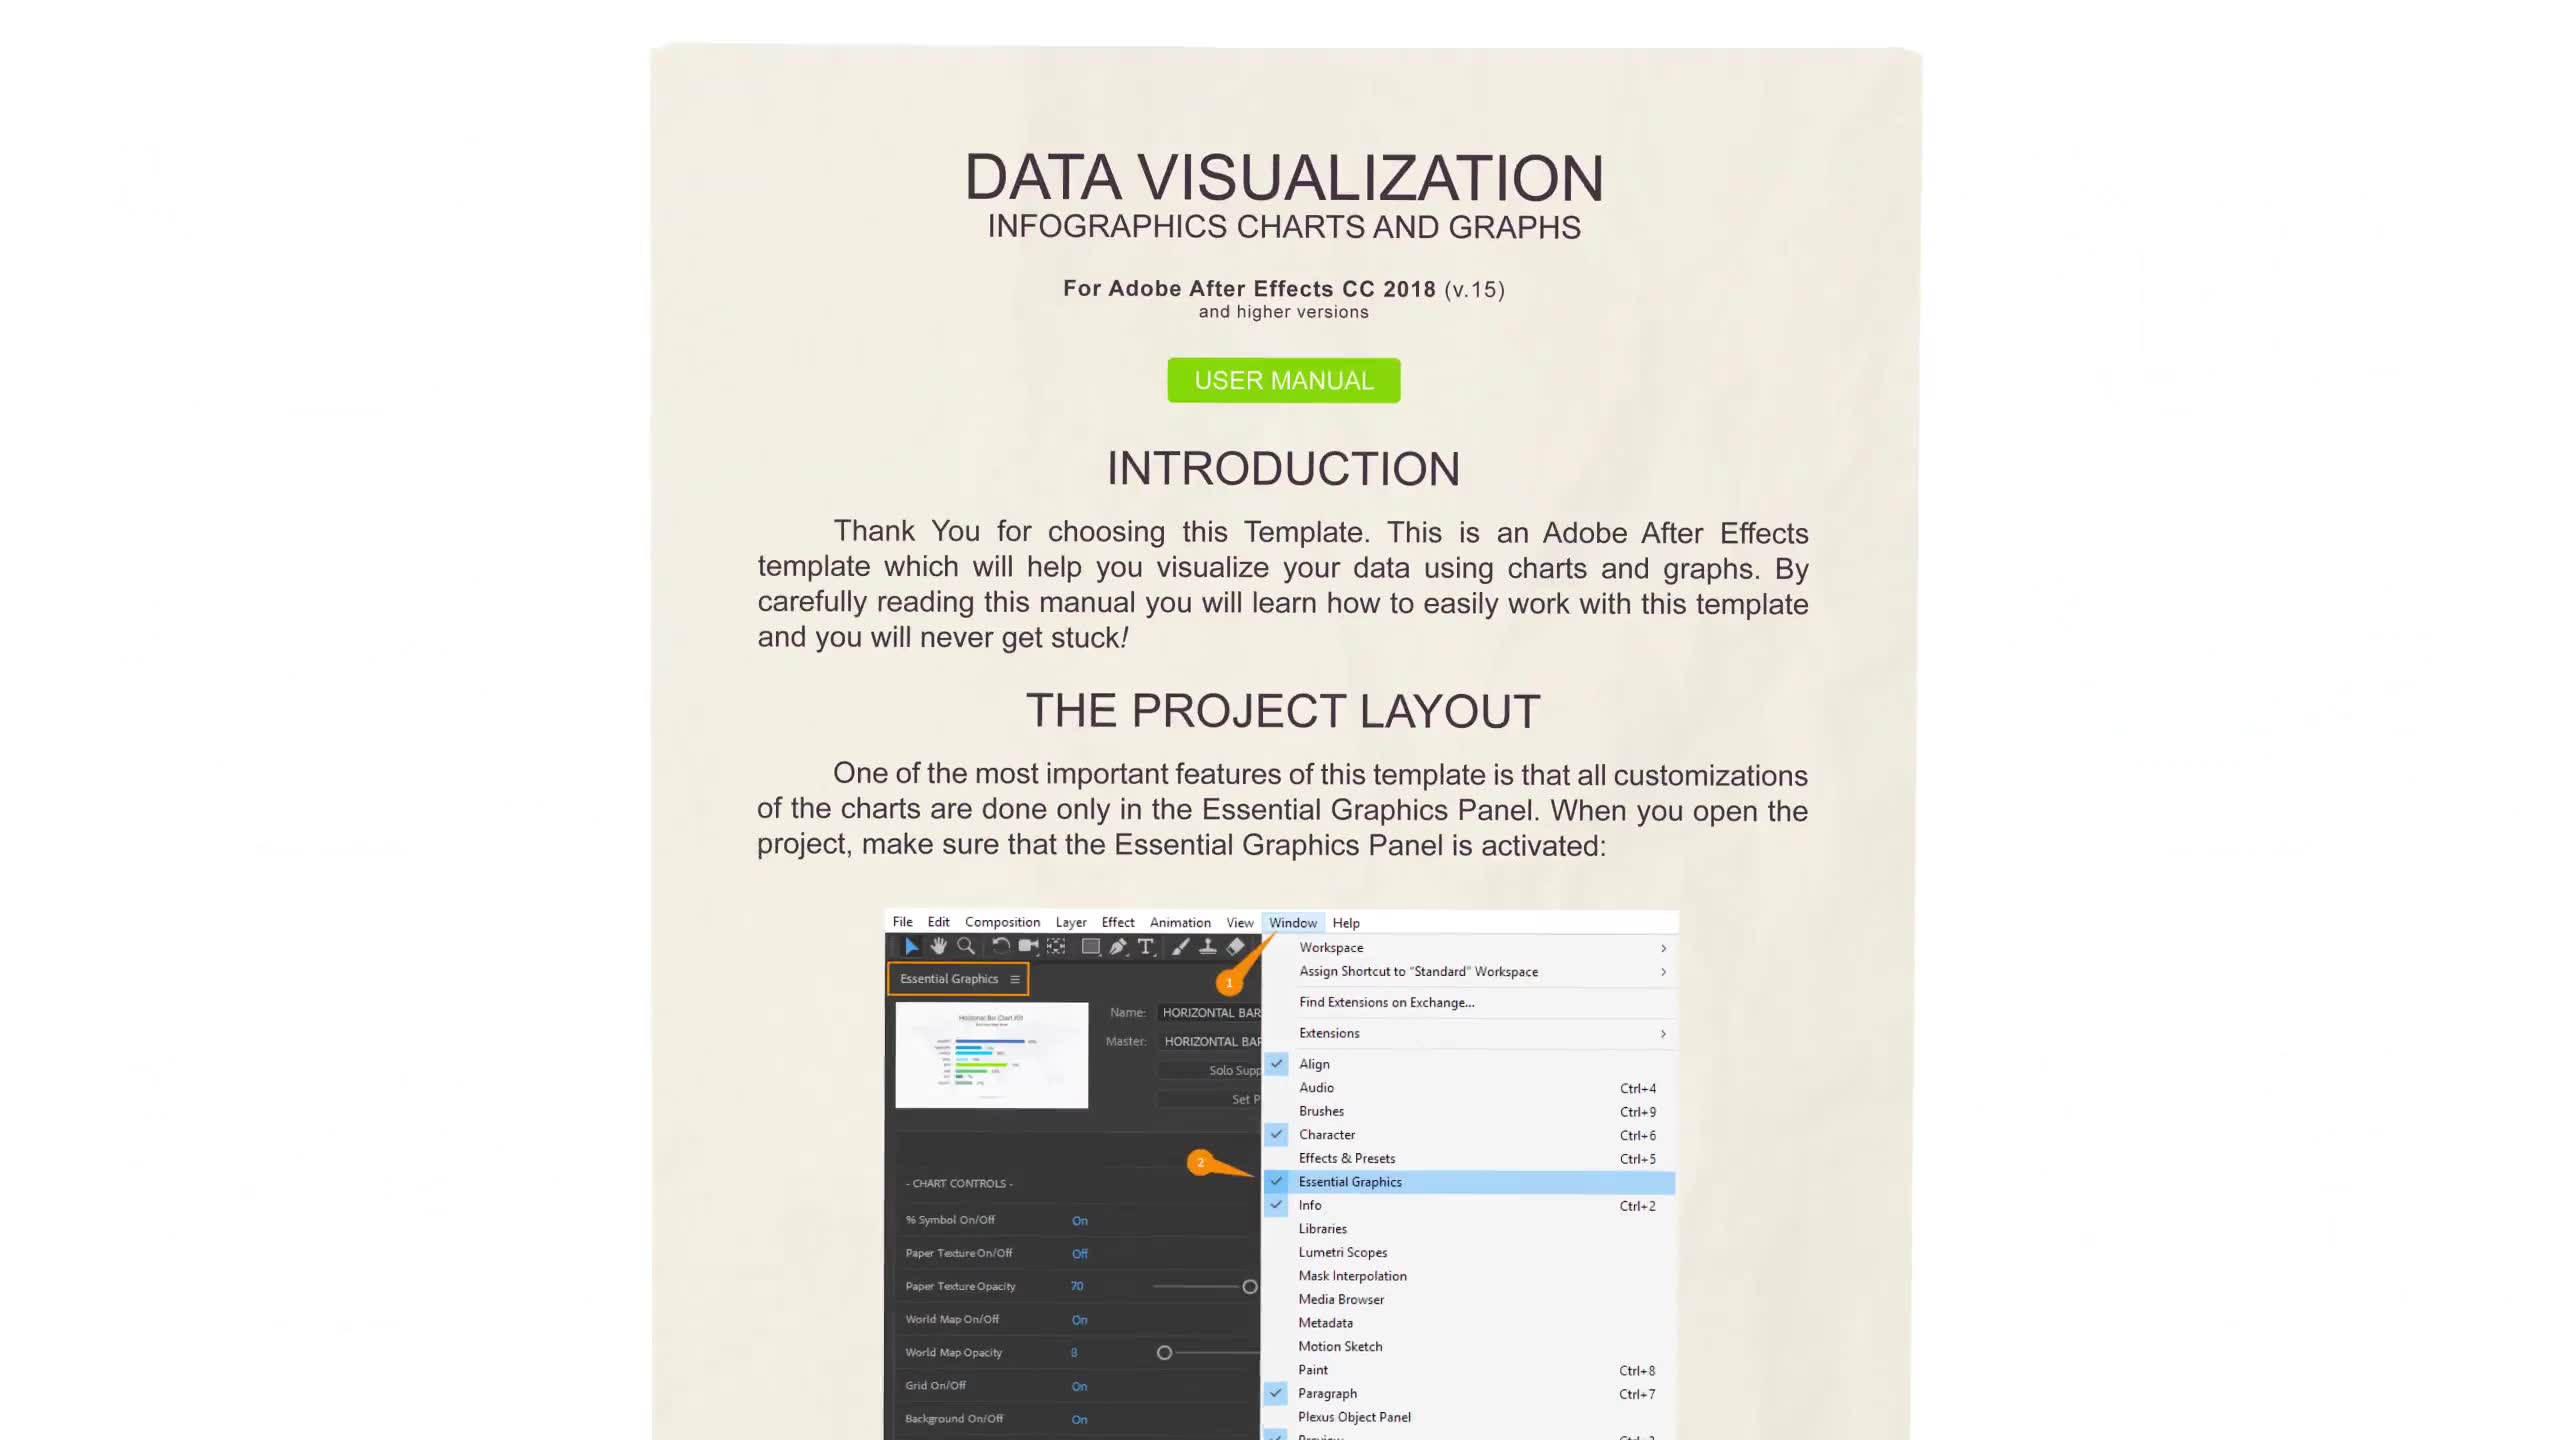 Data Visualization Infographic Charts and Graphs - Download Videohive 21788304